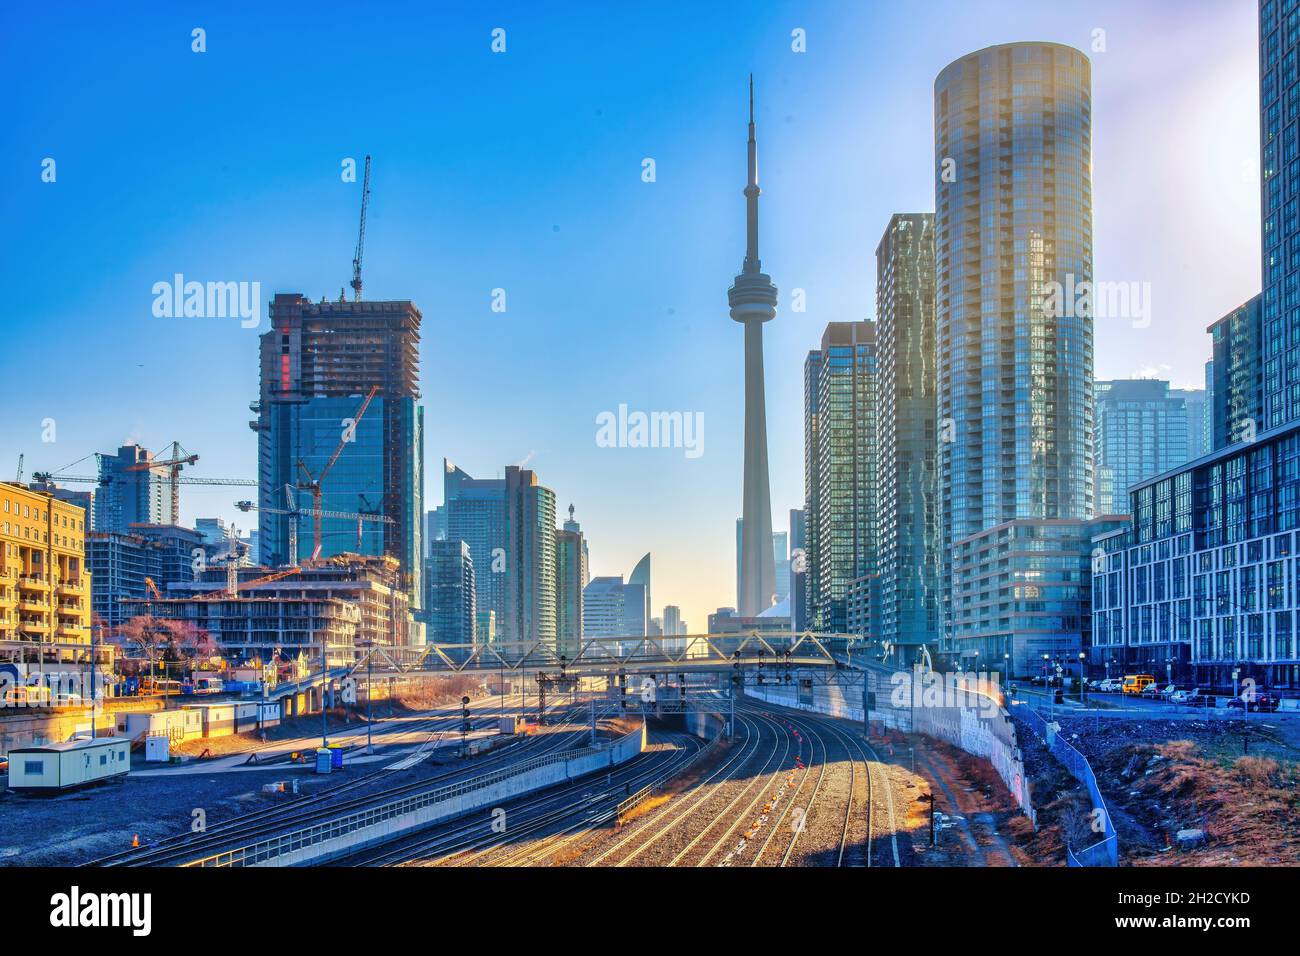 The CN Tower and the Toronto skyline seen in the early morning. Sunbeams can be seen coming between the buildings. Stock Photo